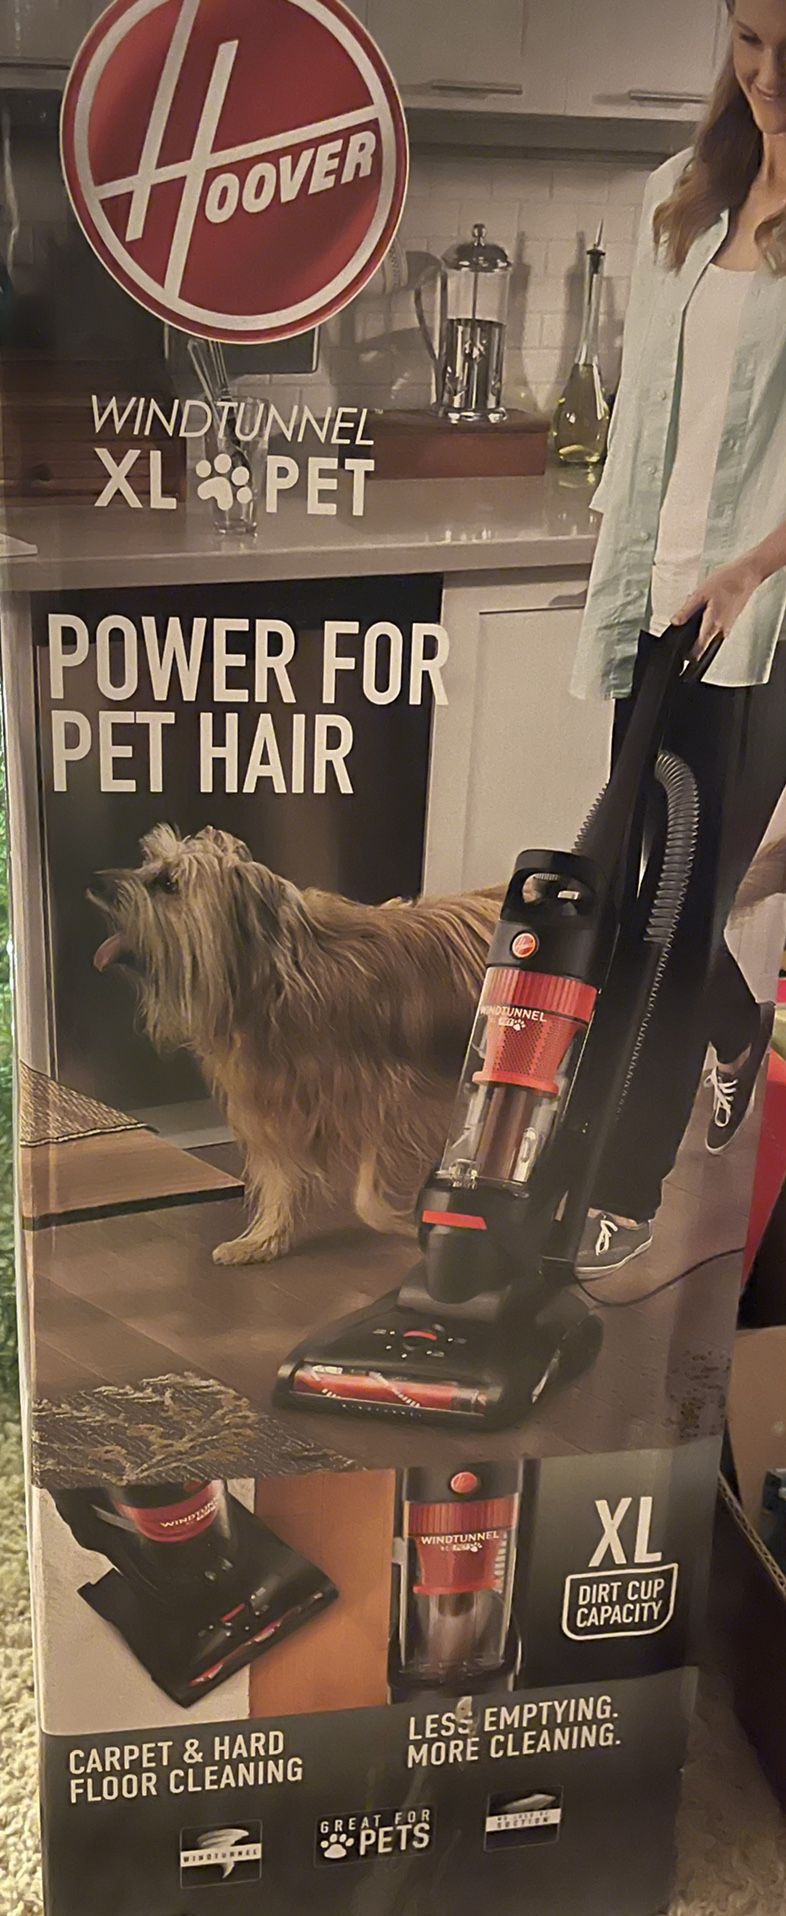 $100. Brand New -Never Opened Hoover Wind tunnel XL Vaccum